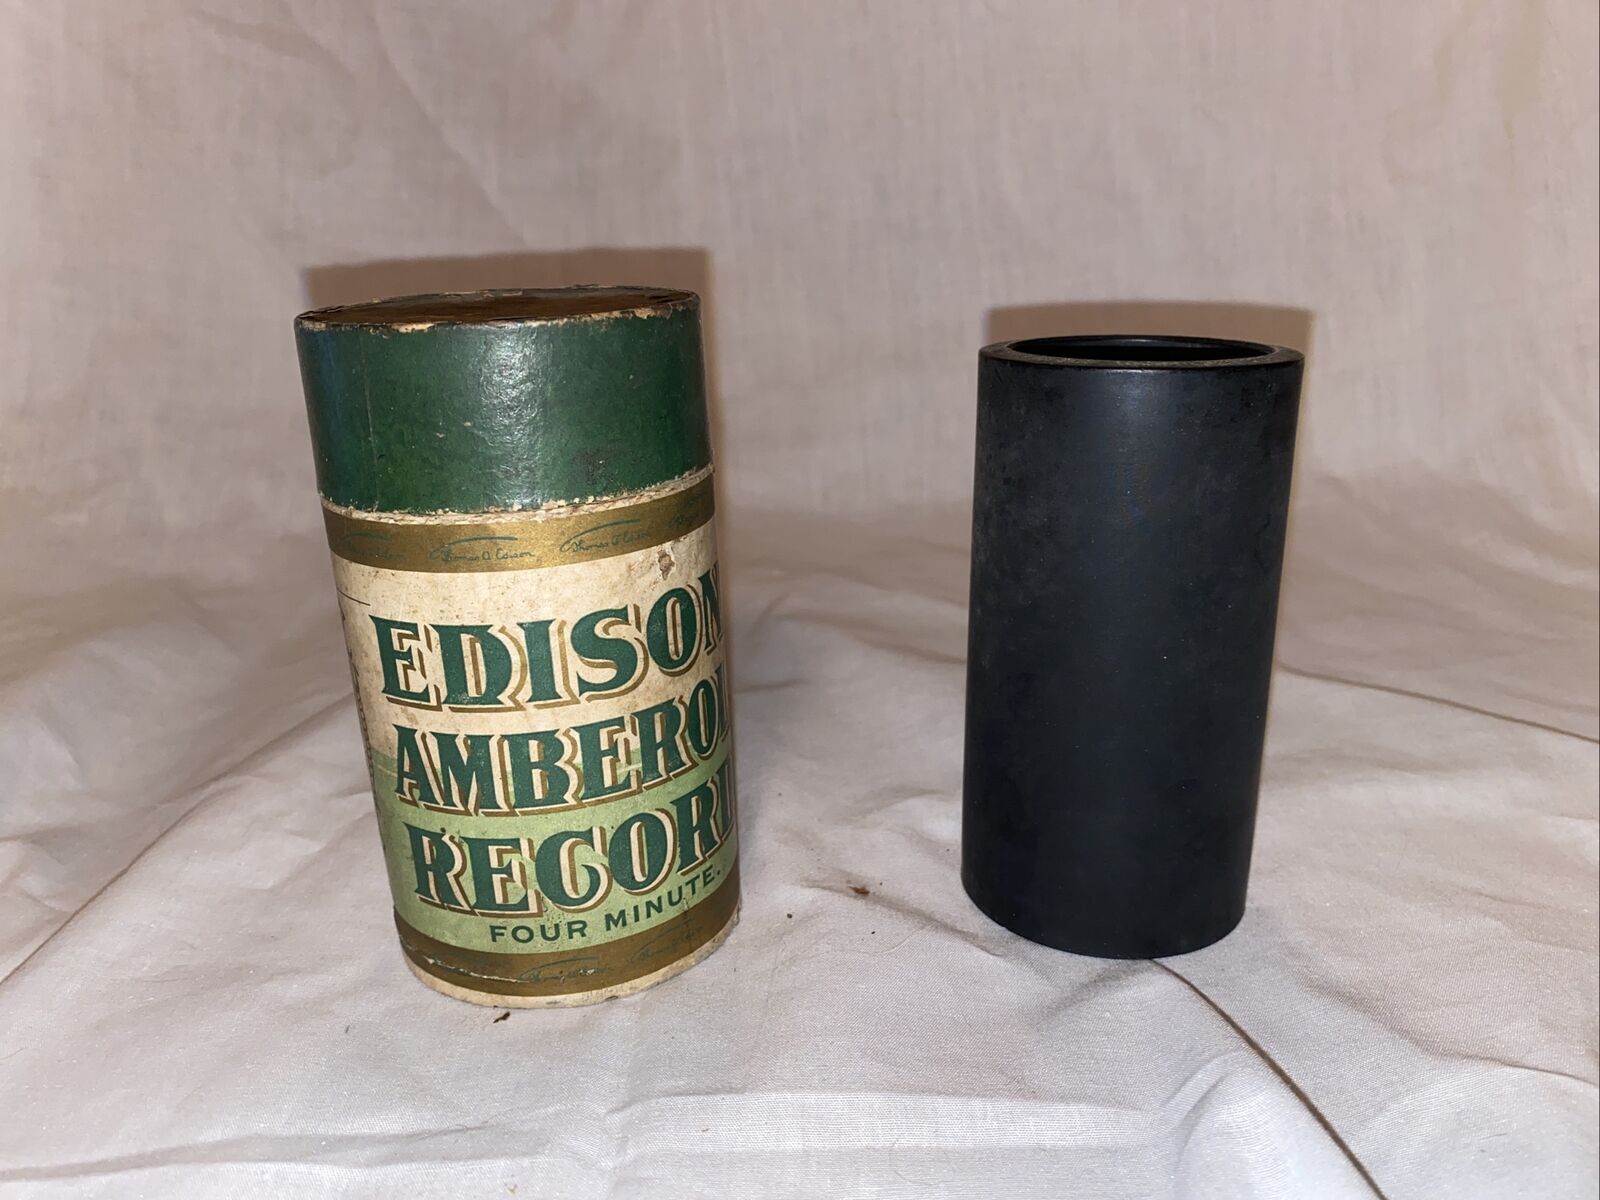 Vintage Thomas Edison Amberol Record Talking Stories About The Baby 4M-57 - $34.30